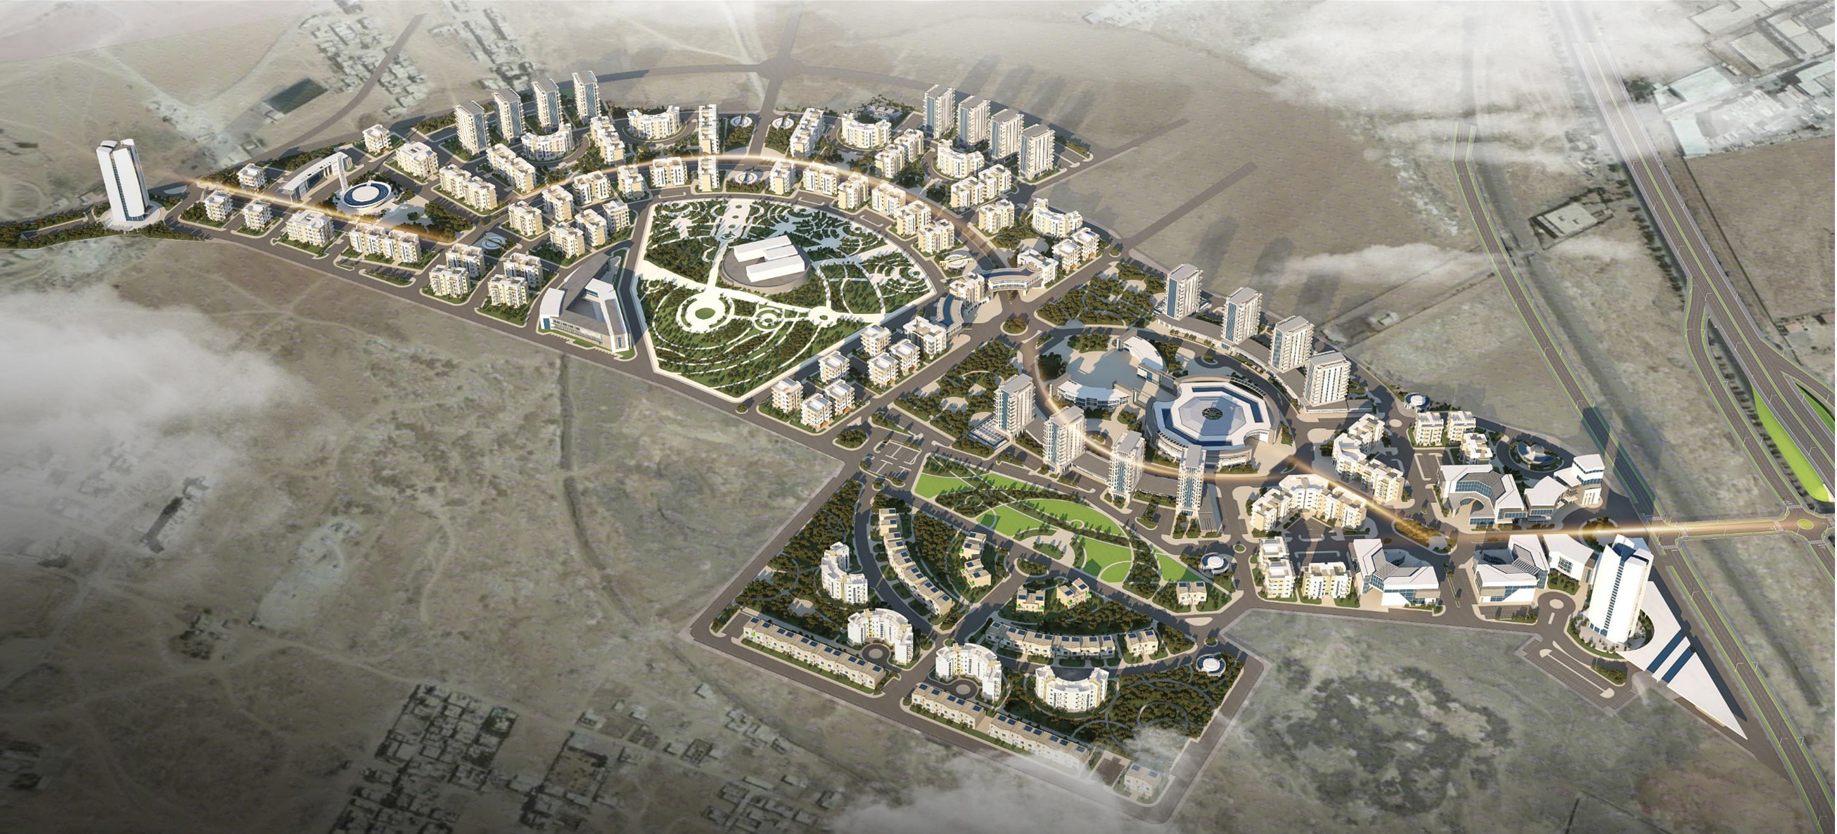 Designing a Residential Suburb for (IGO) company in Damascus countryside with 600.000 m2 area.